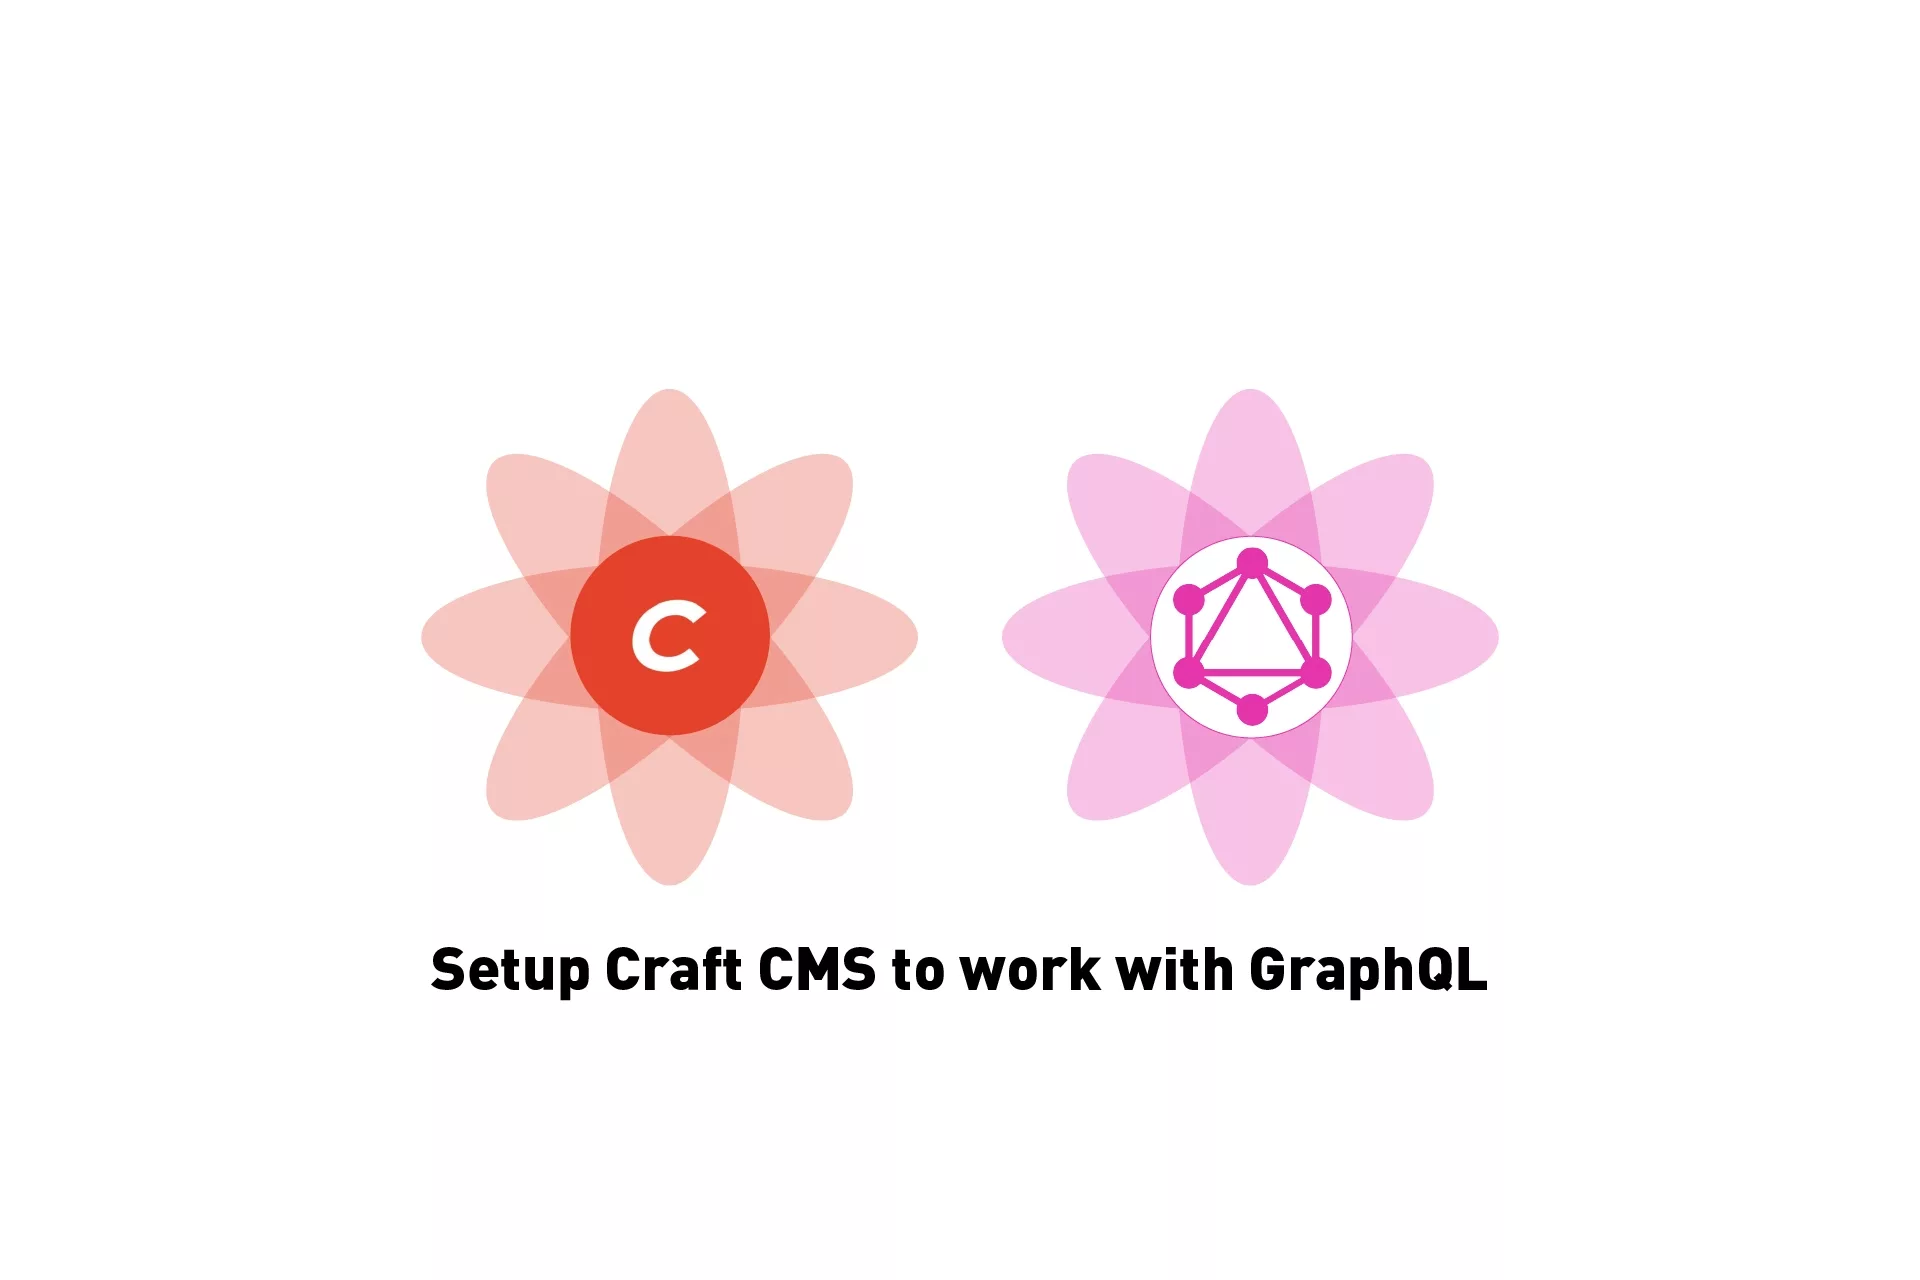 Two flowers that represent Craft CMS and GraphQL with the text 'Setup Craft CMS to work with GraphQL' beneath them.